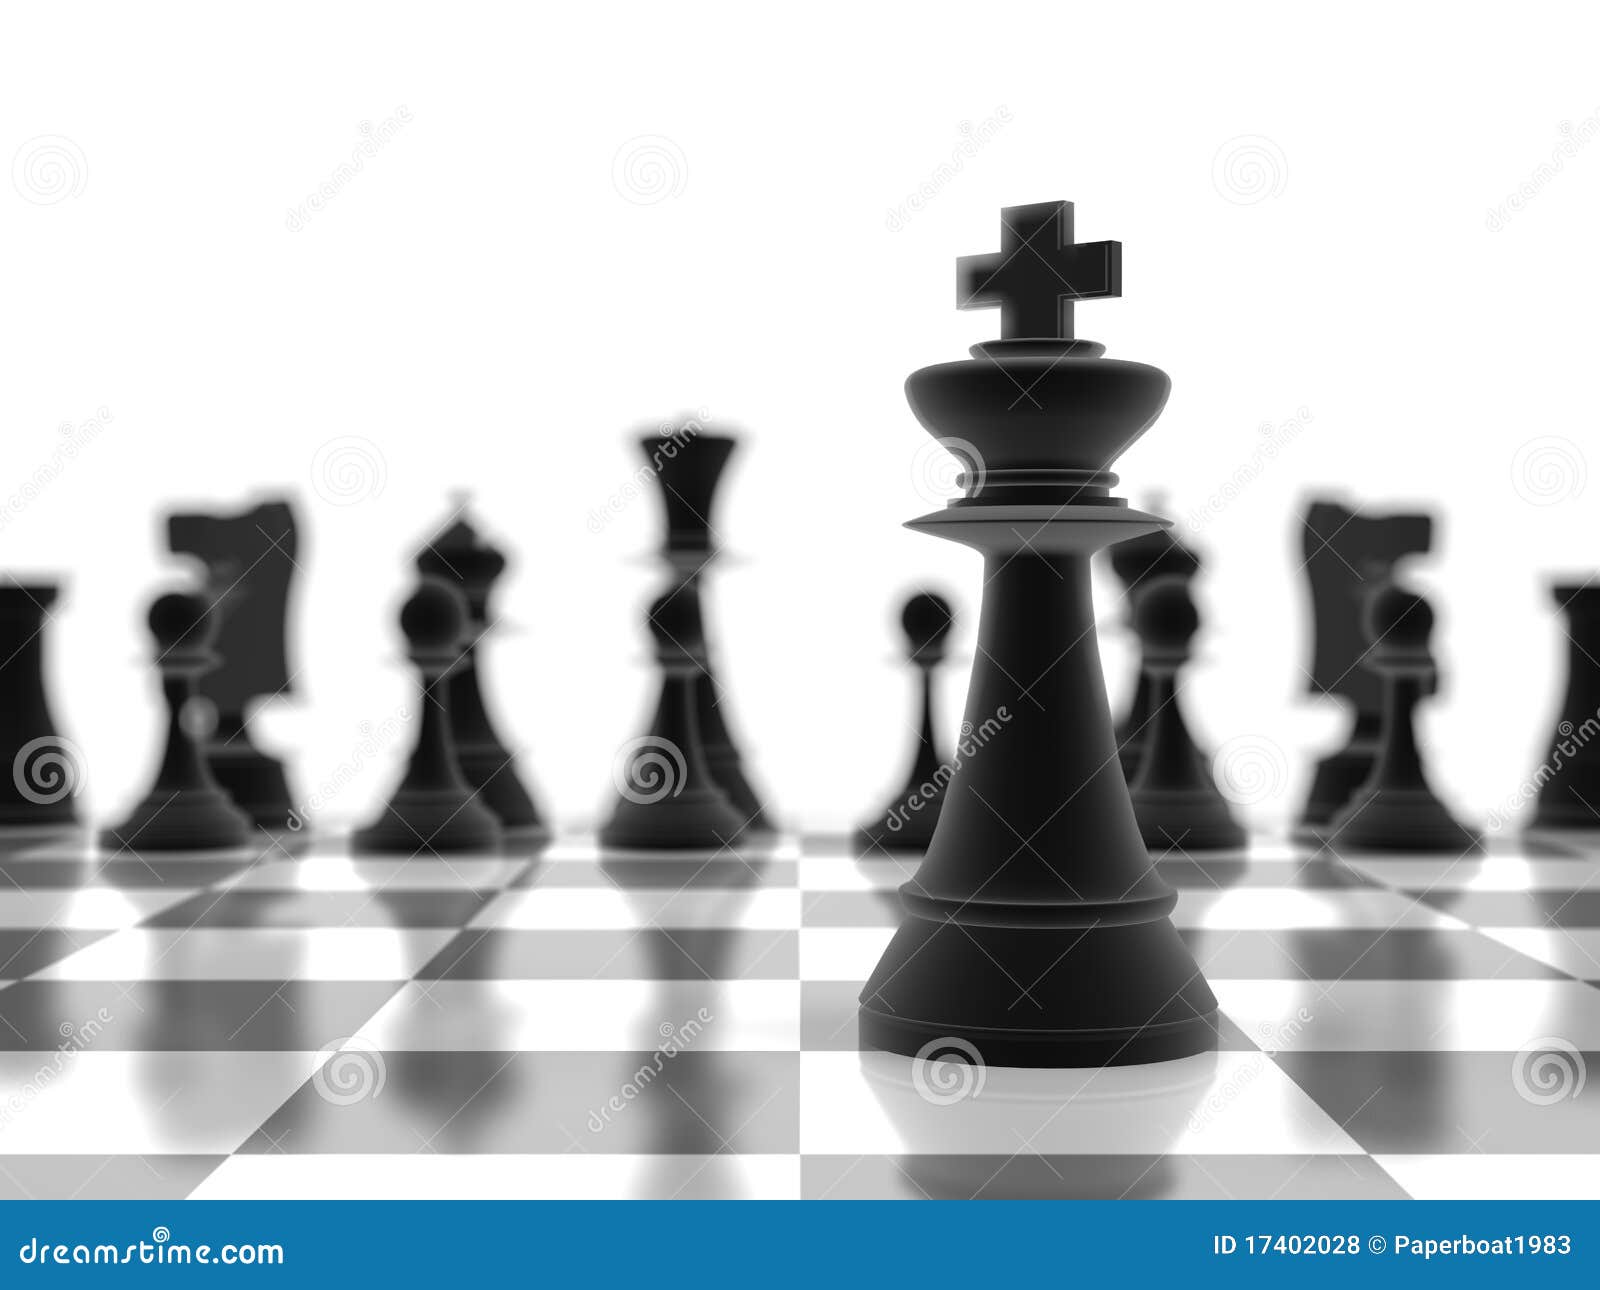 The King Chess Piece In Focus Royalty Free Stock Photos - Image: 17402028